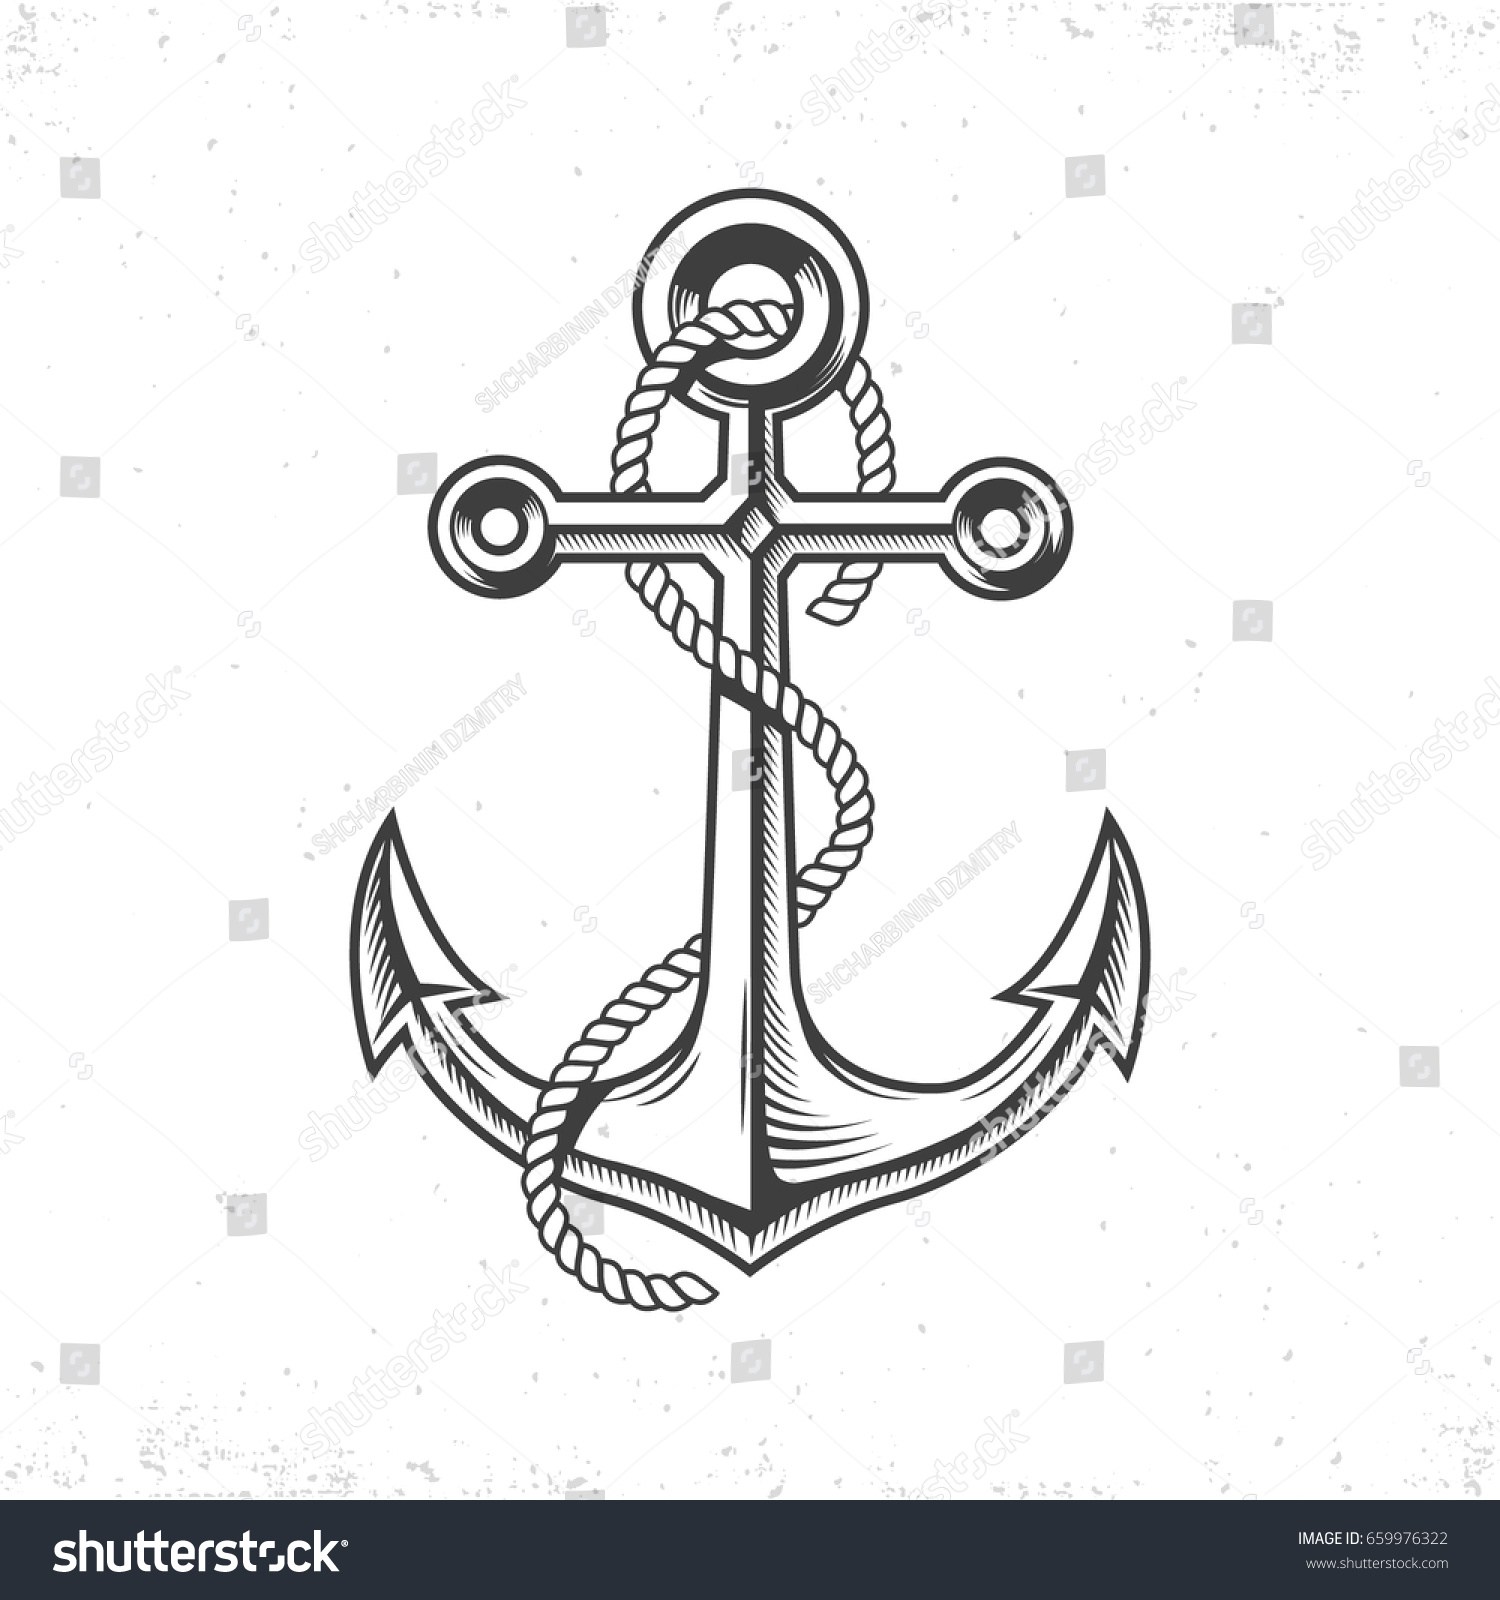 SVG of Vintage sea anchor with a rope, isolated on white background with grunge texture.Hand drawn in a graphic style svg